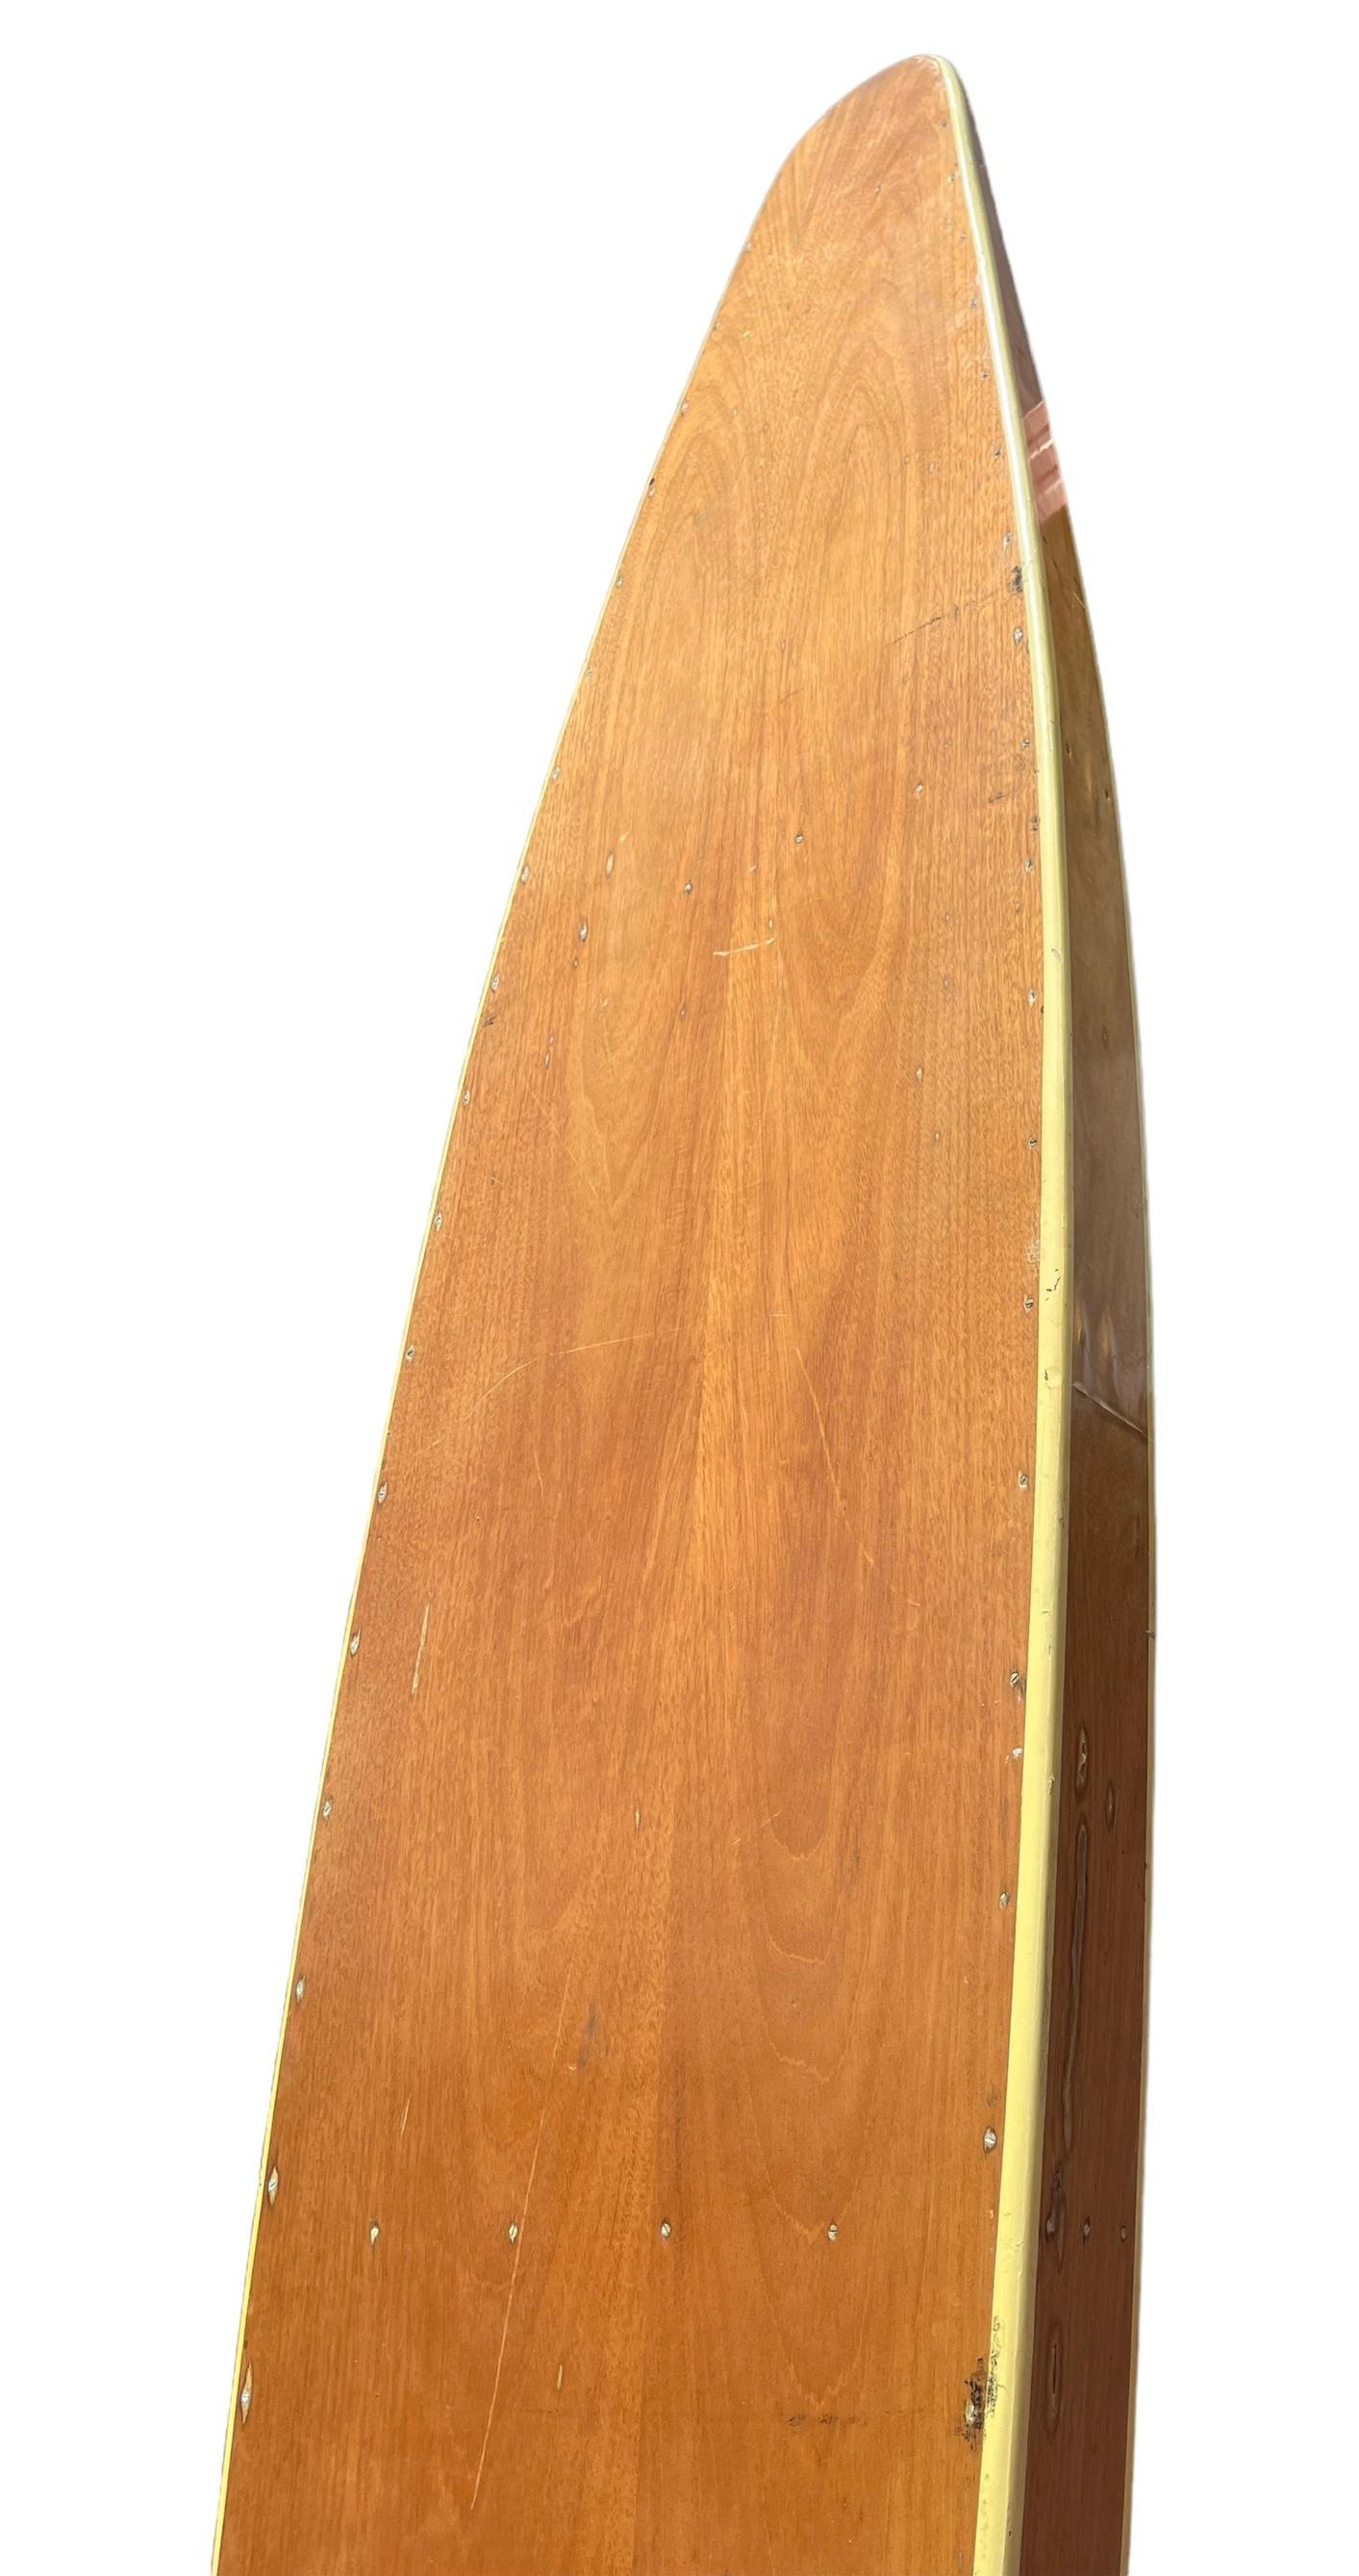 1930s Replica Tom Blake hollow wooden surfboard In Fair Condition For Sale In Haleiwa, HI